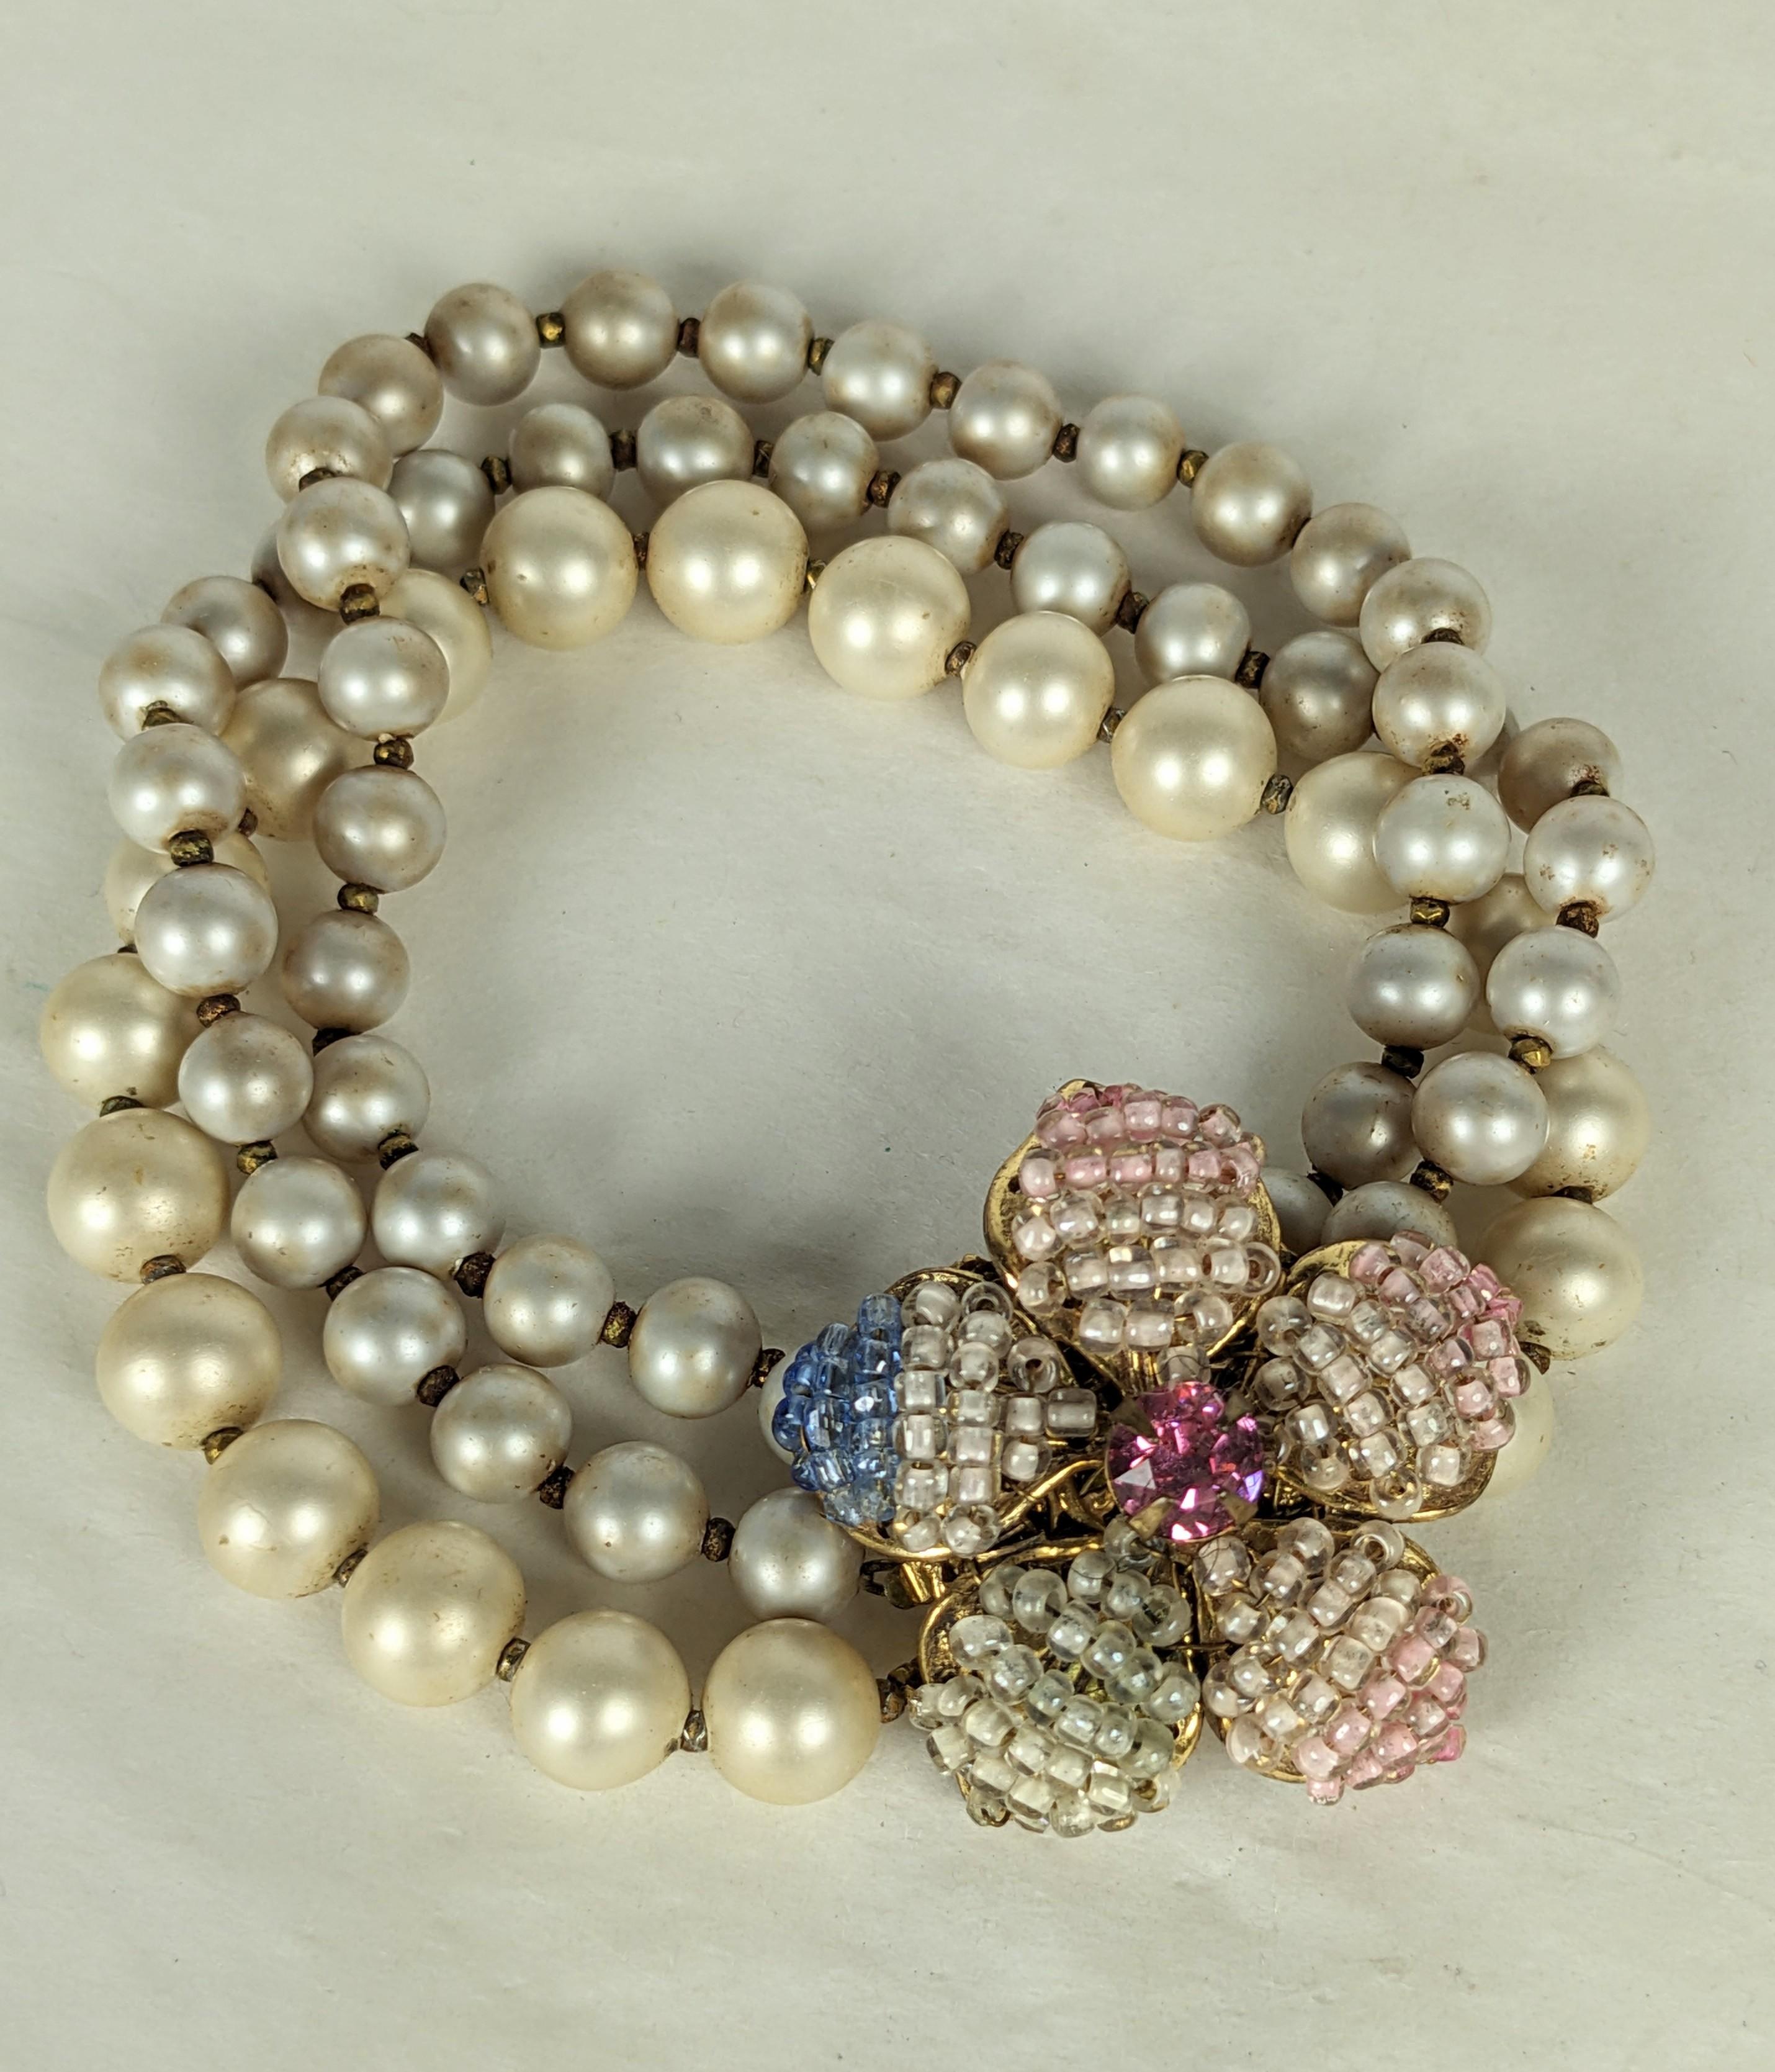 Miriam Haskell three strand  two toned faux pearl bracelet ,with minute  gilt  
 faceted cut steel spacers. The hand sewn  pastel ombre beaded flower head clasp  in shades of blue and pink with pink crystal rhinestone  center.
1950's USA. Signed